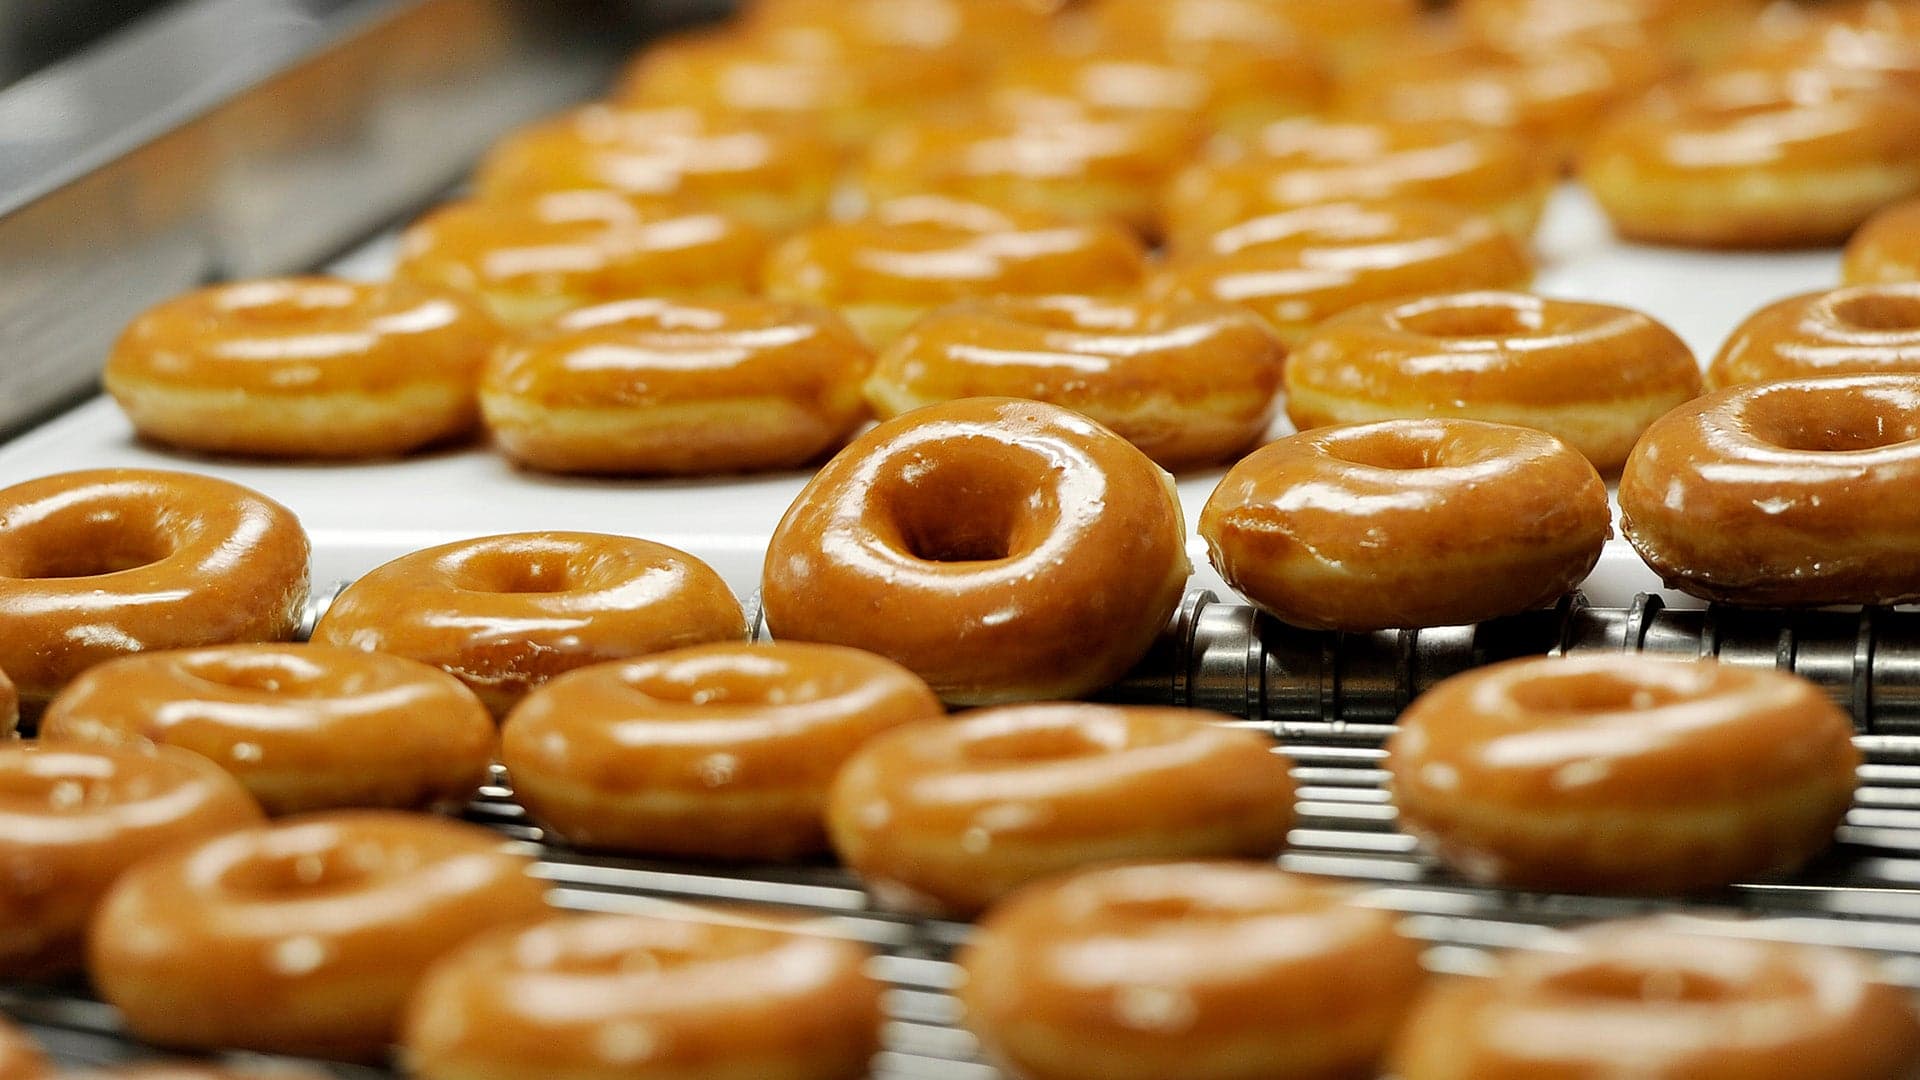 Florida Man Awarded $37,500 After Cops Think Glazed Doughnut Crumbs Are Meth